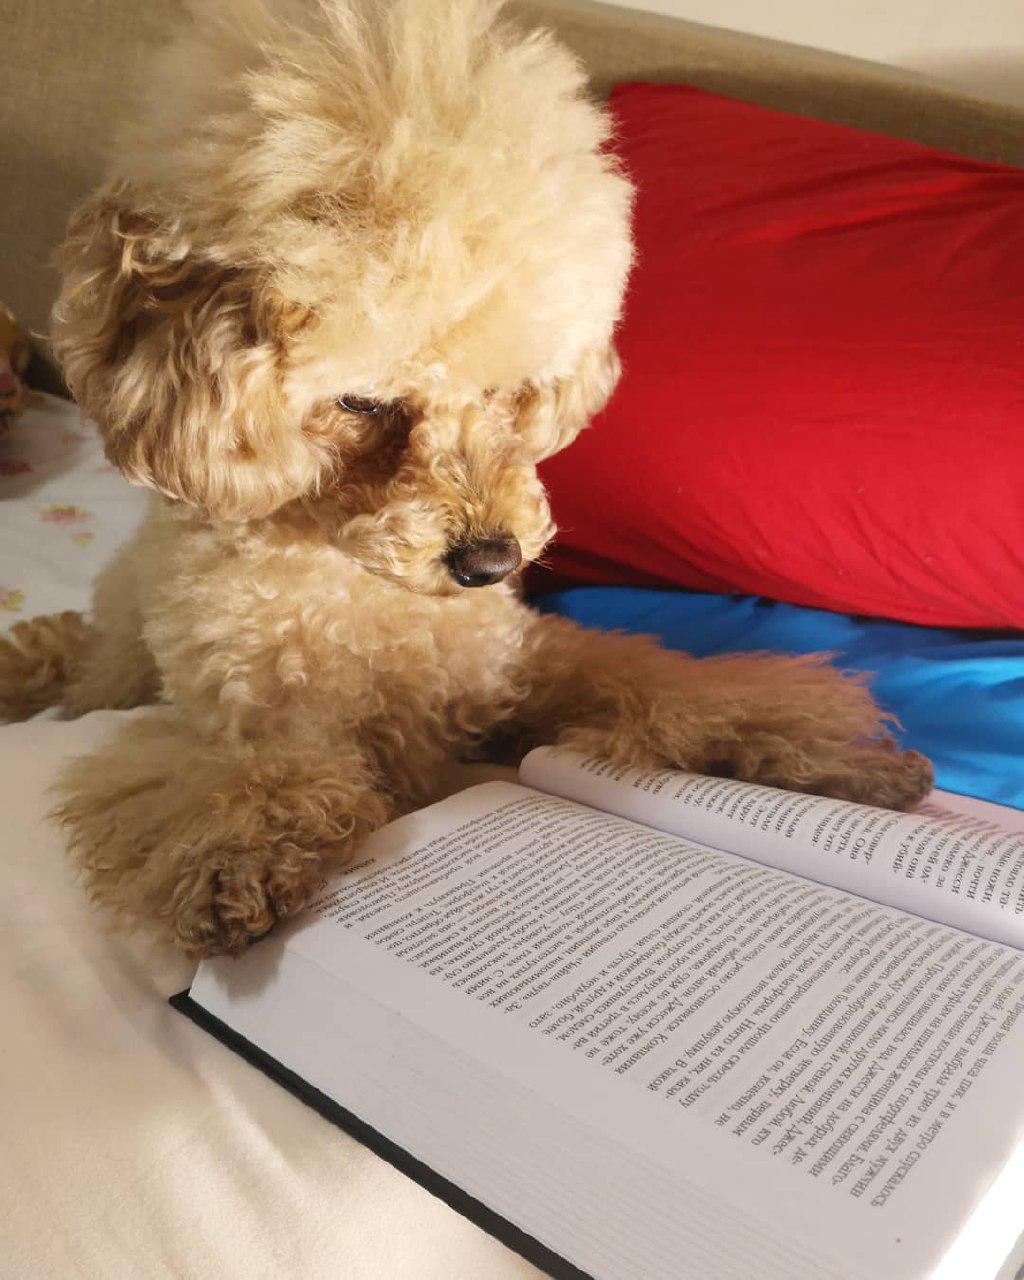 A cream Poodle puppy lying on the bed while staring at an open book in front of him